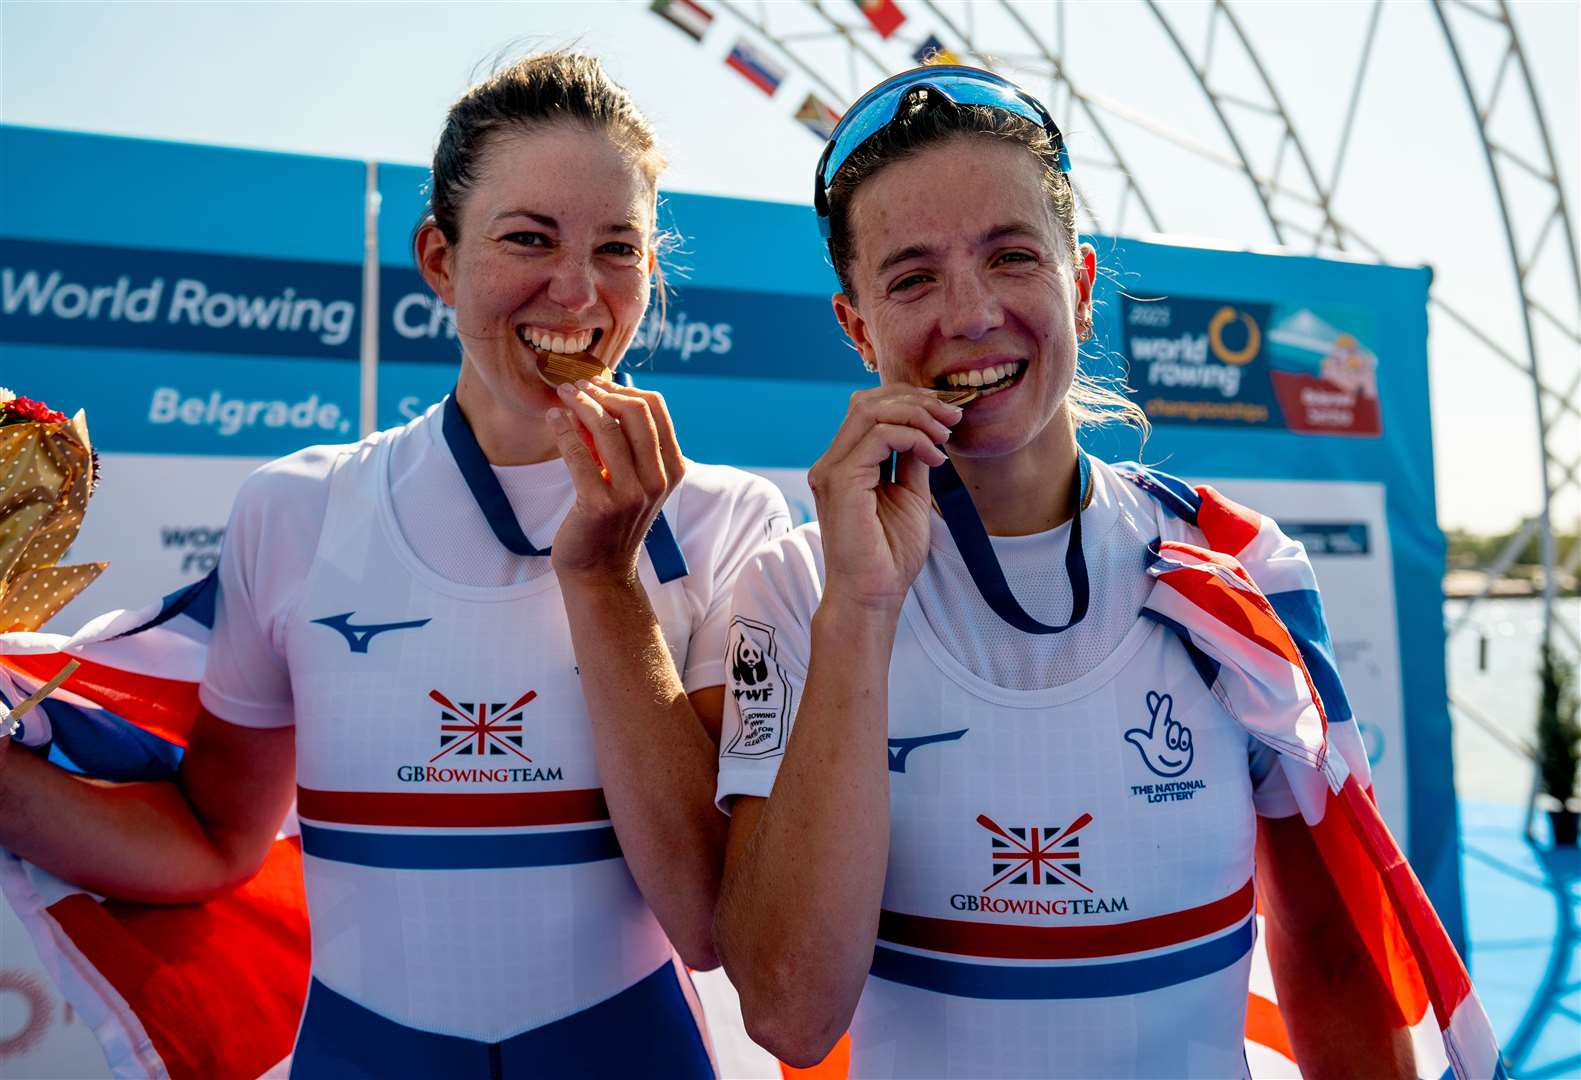 Emily Craig and Imogen Grant ruled the Worlds in Belgrade. Picture: Benedict Tufnell